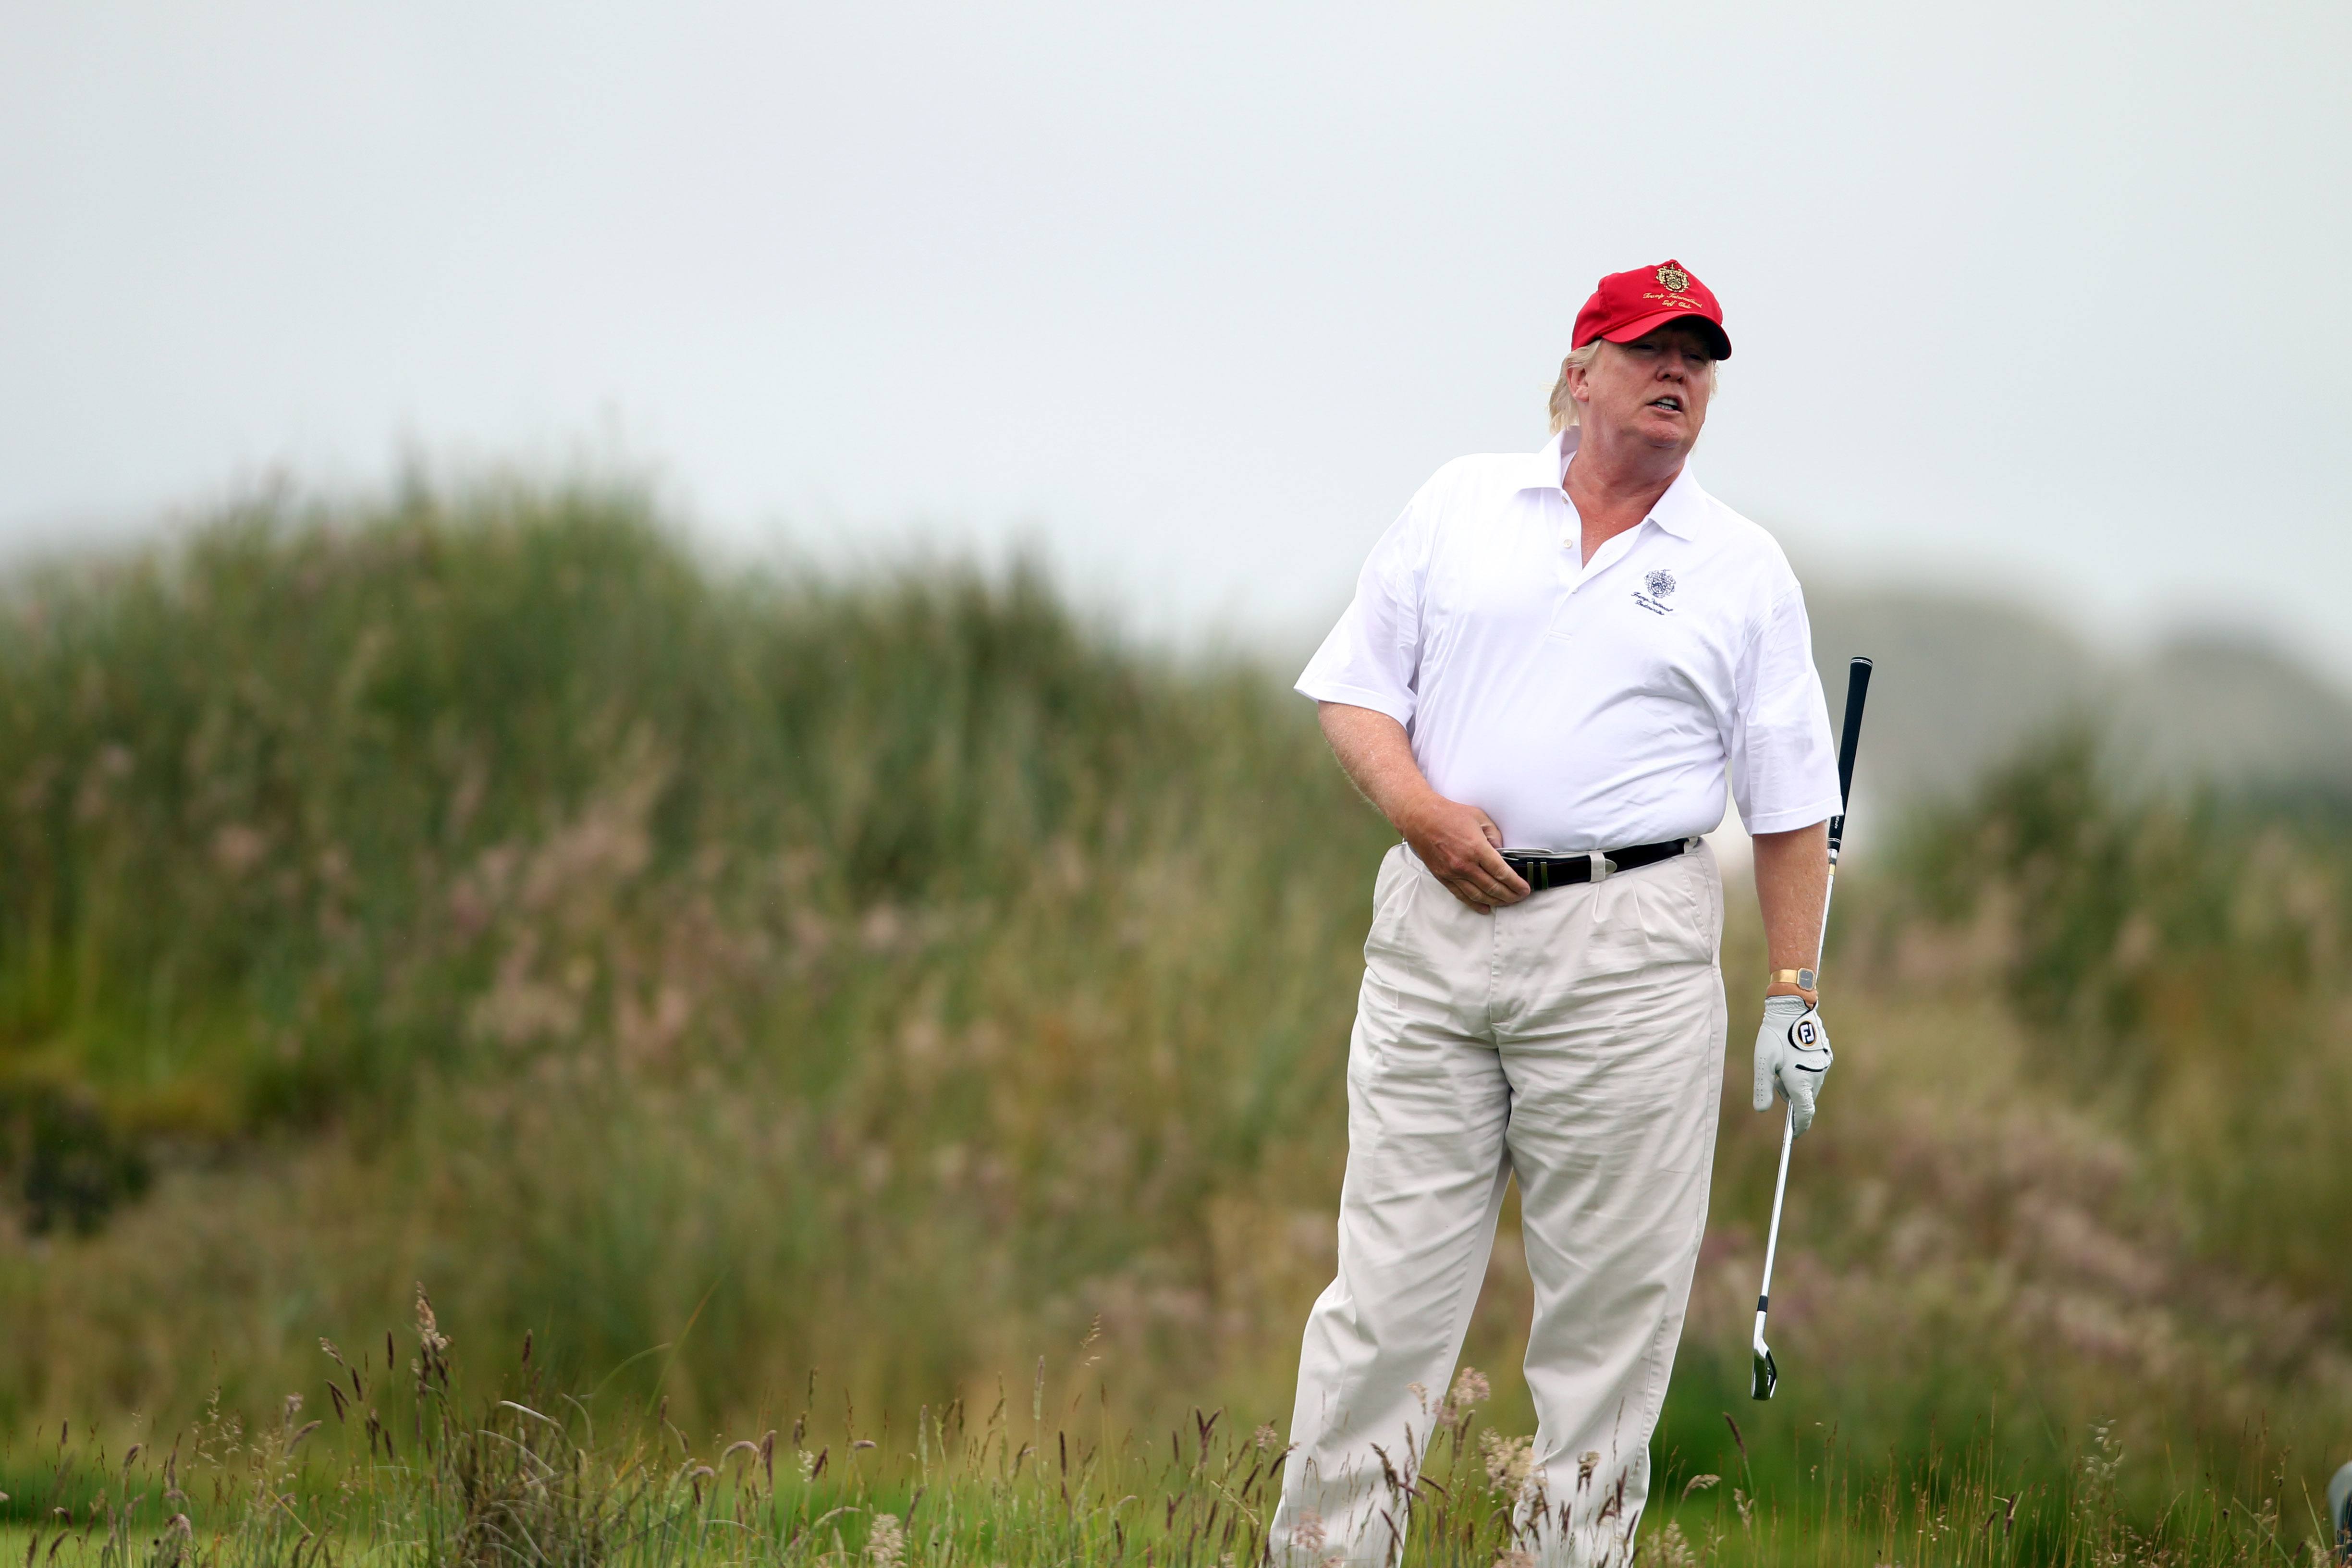 Donald Trump plays enough golf to be considered an athlete.